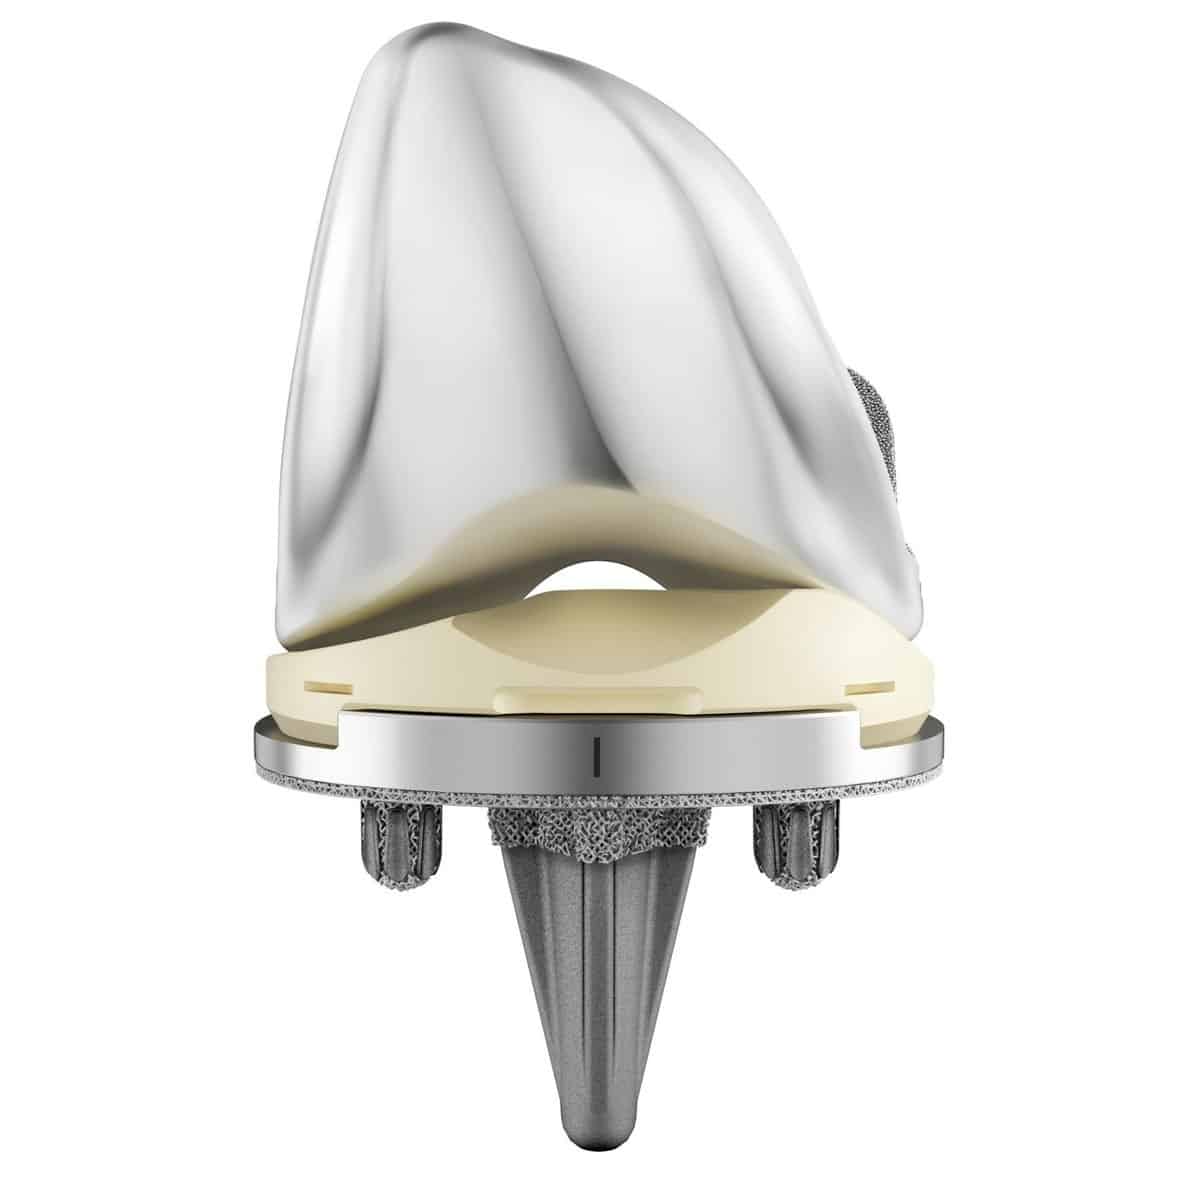 DePuy Synthes Knee Replacement